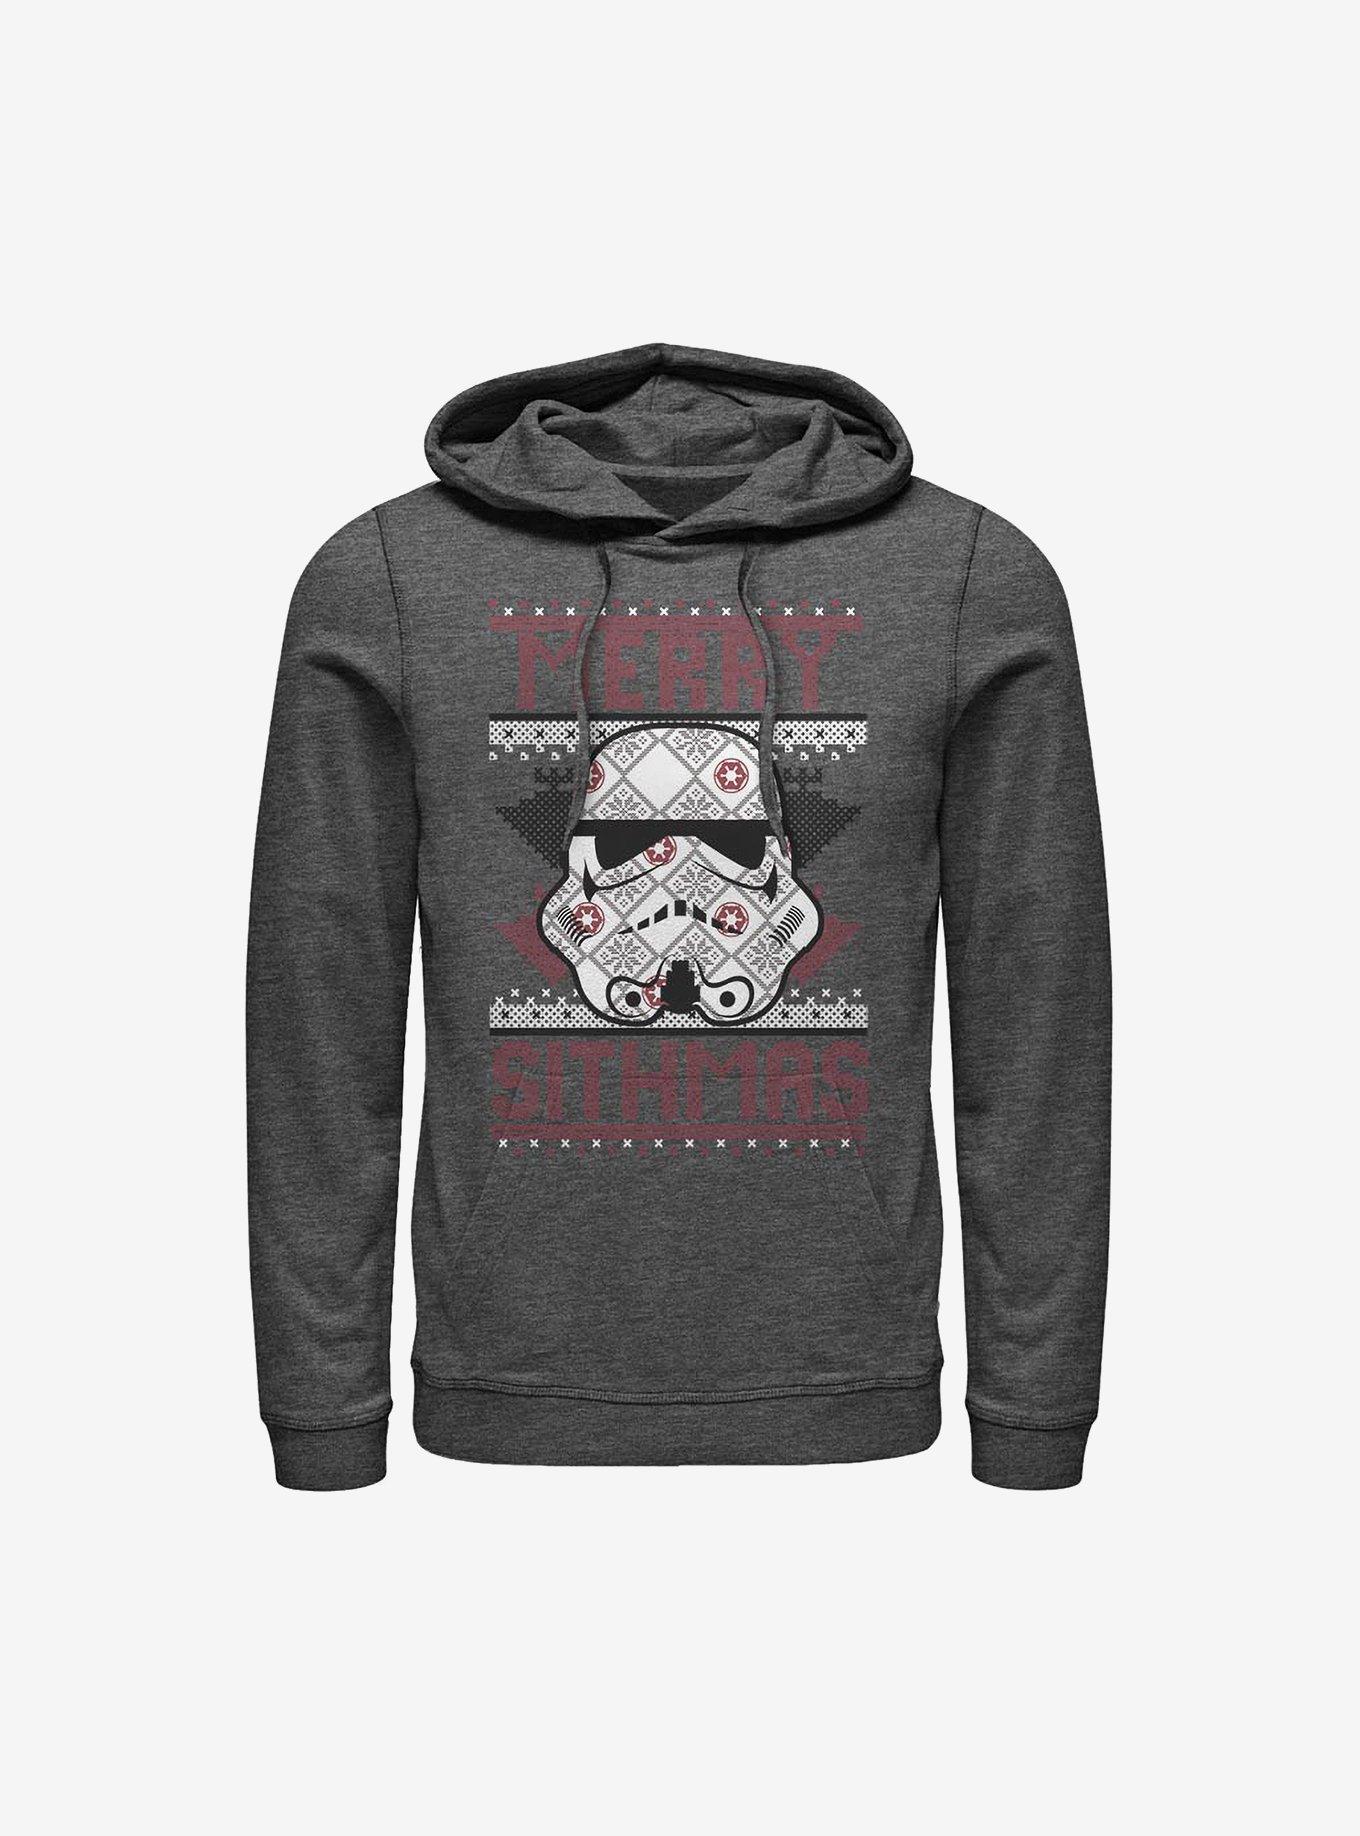 Star Wars Merry Sithmas Ugly Christmas Sweater Hoodie, CHAR HTR, hi-res